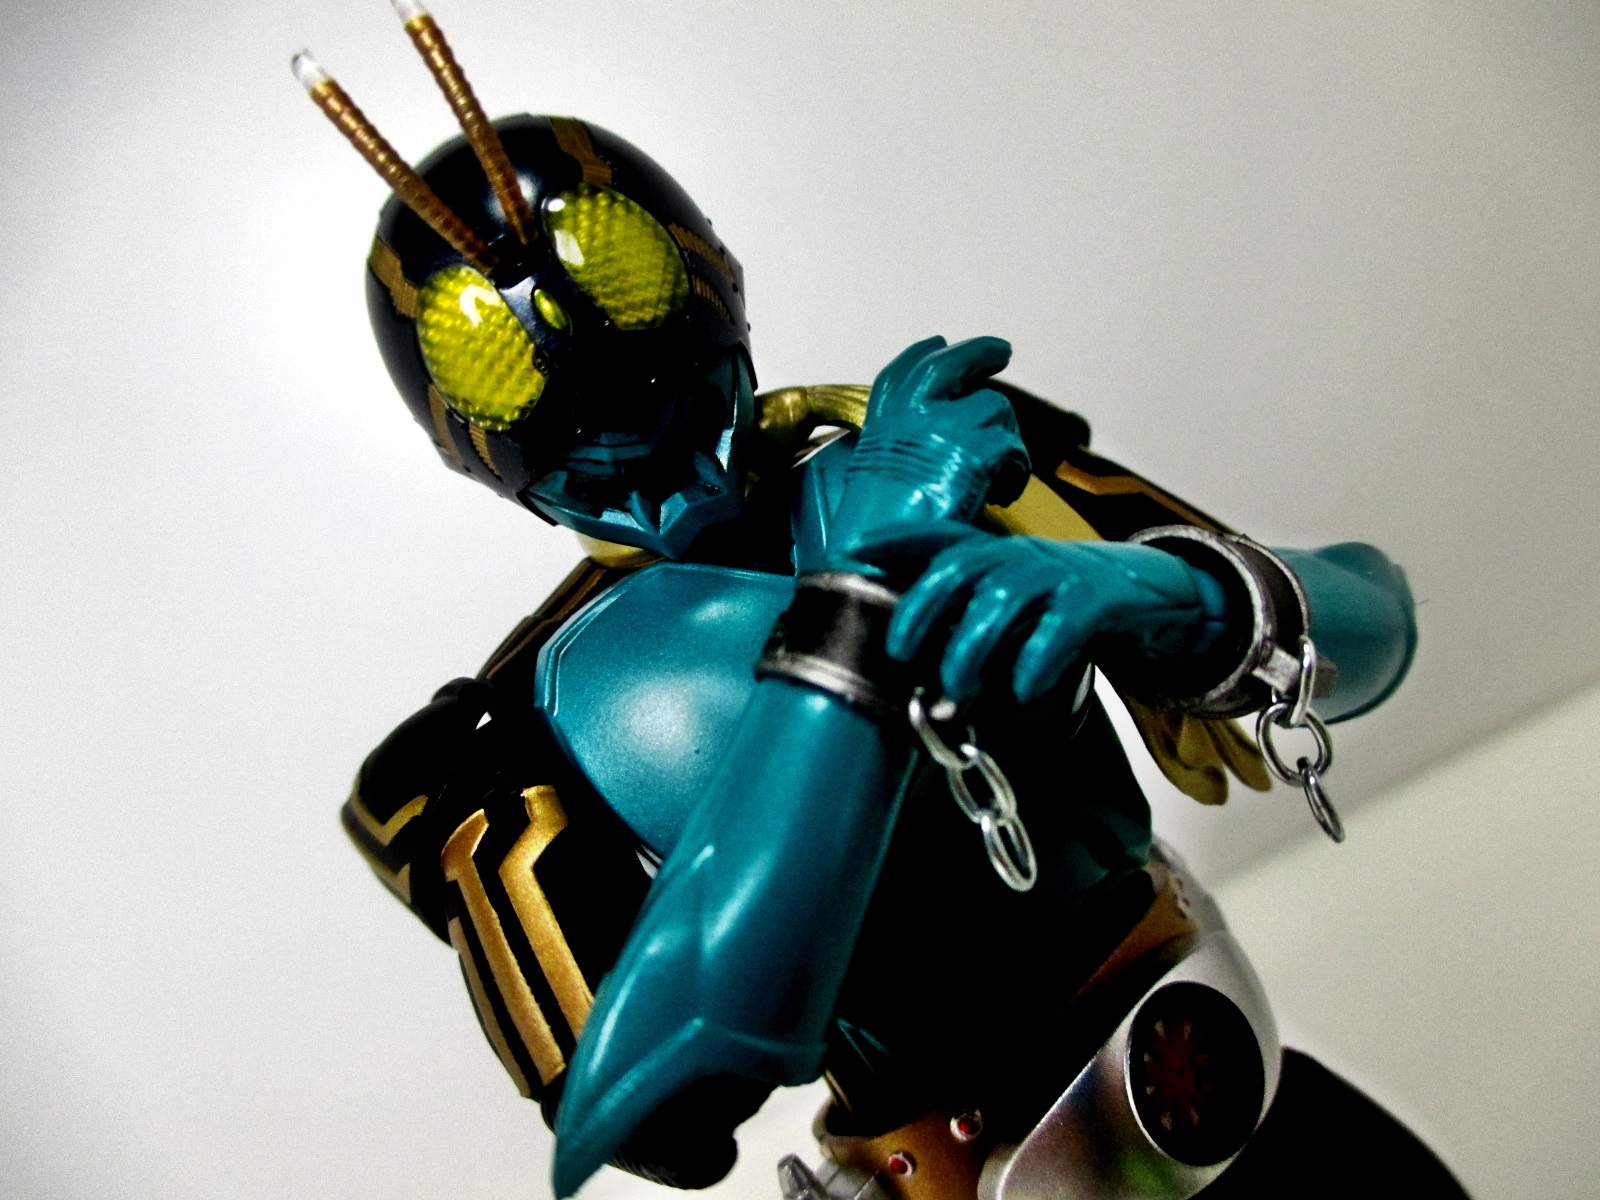 They Say Who S That Guy S H フィギュアーツ 仮面ライダー３号 今日も夢を見続けるブログ Ver 2